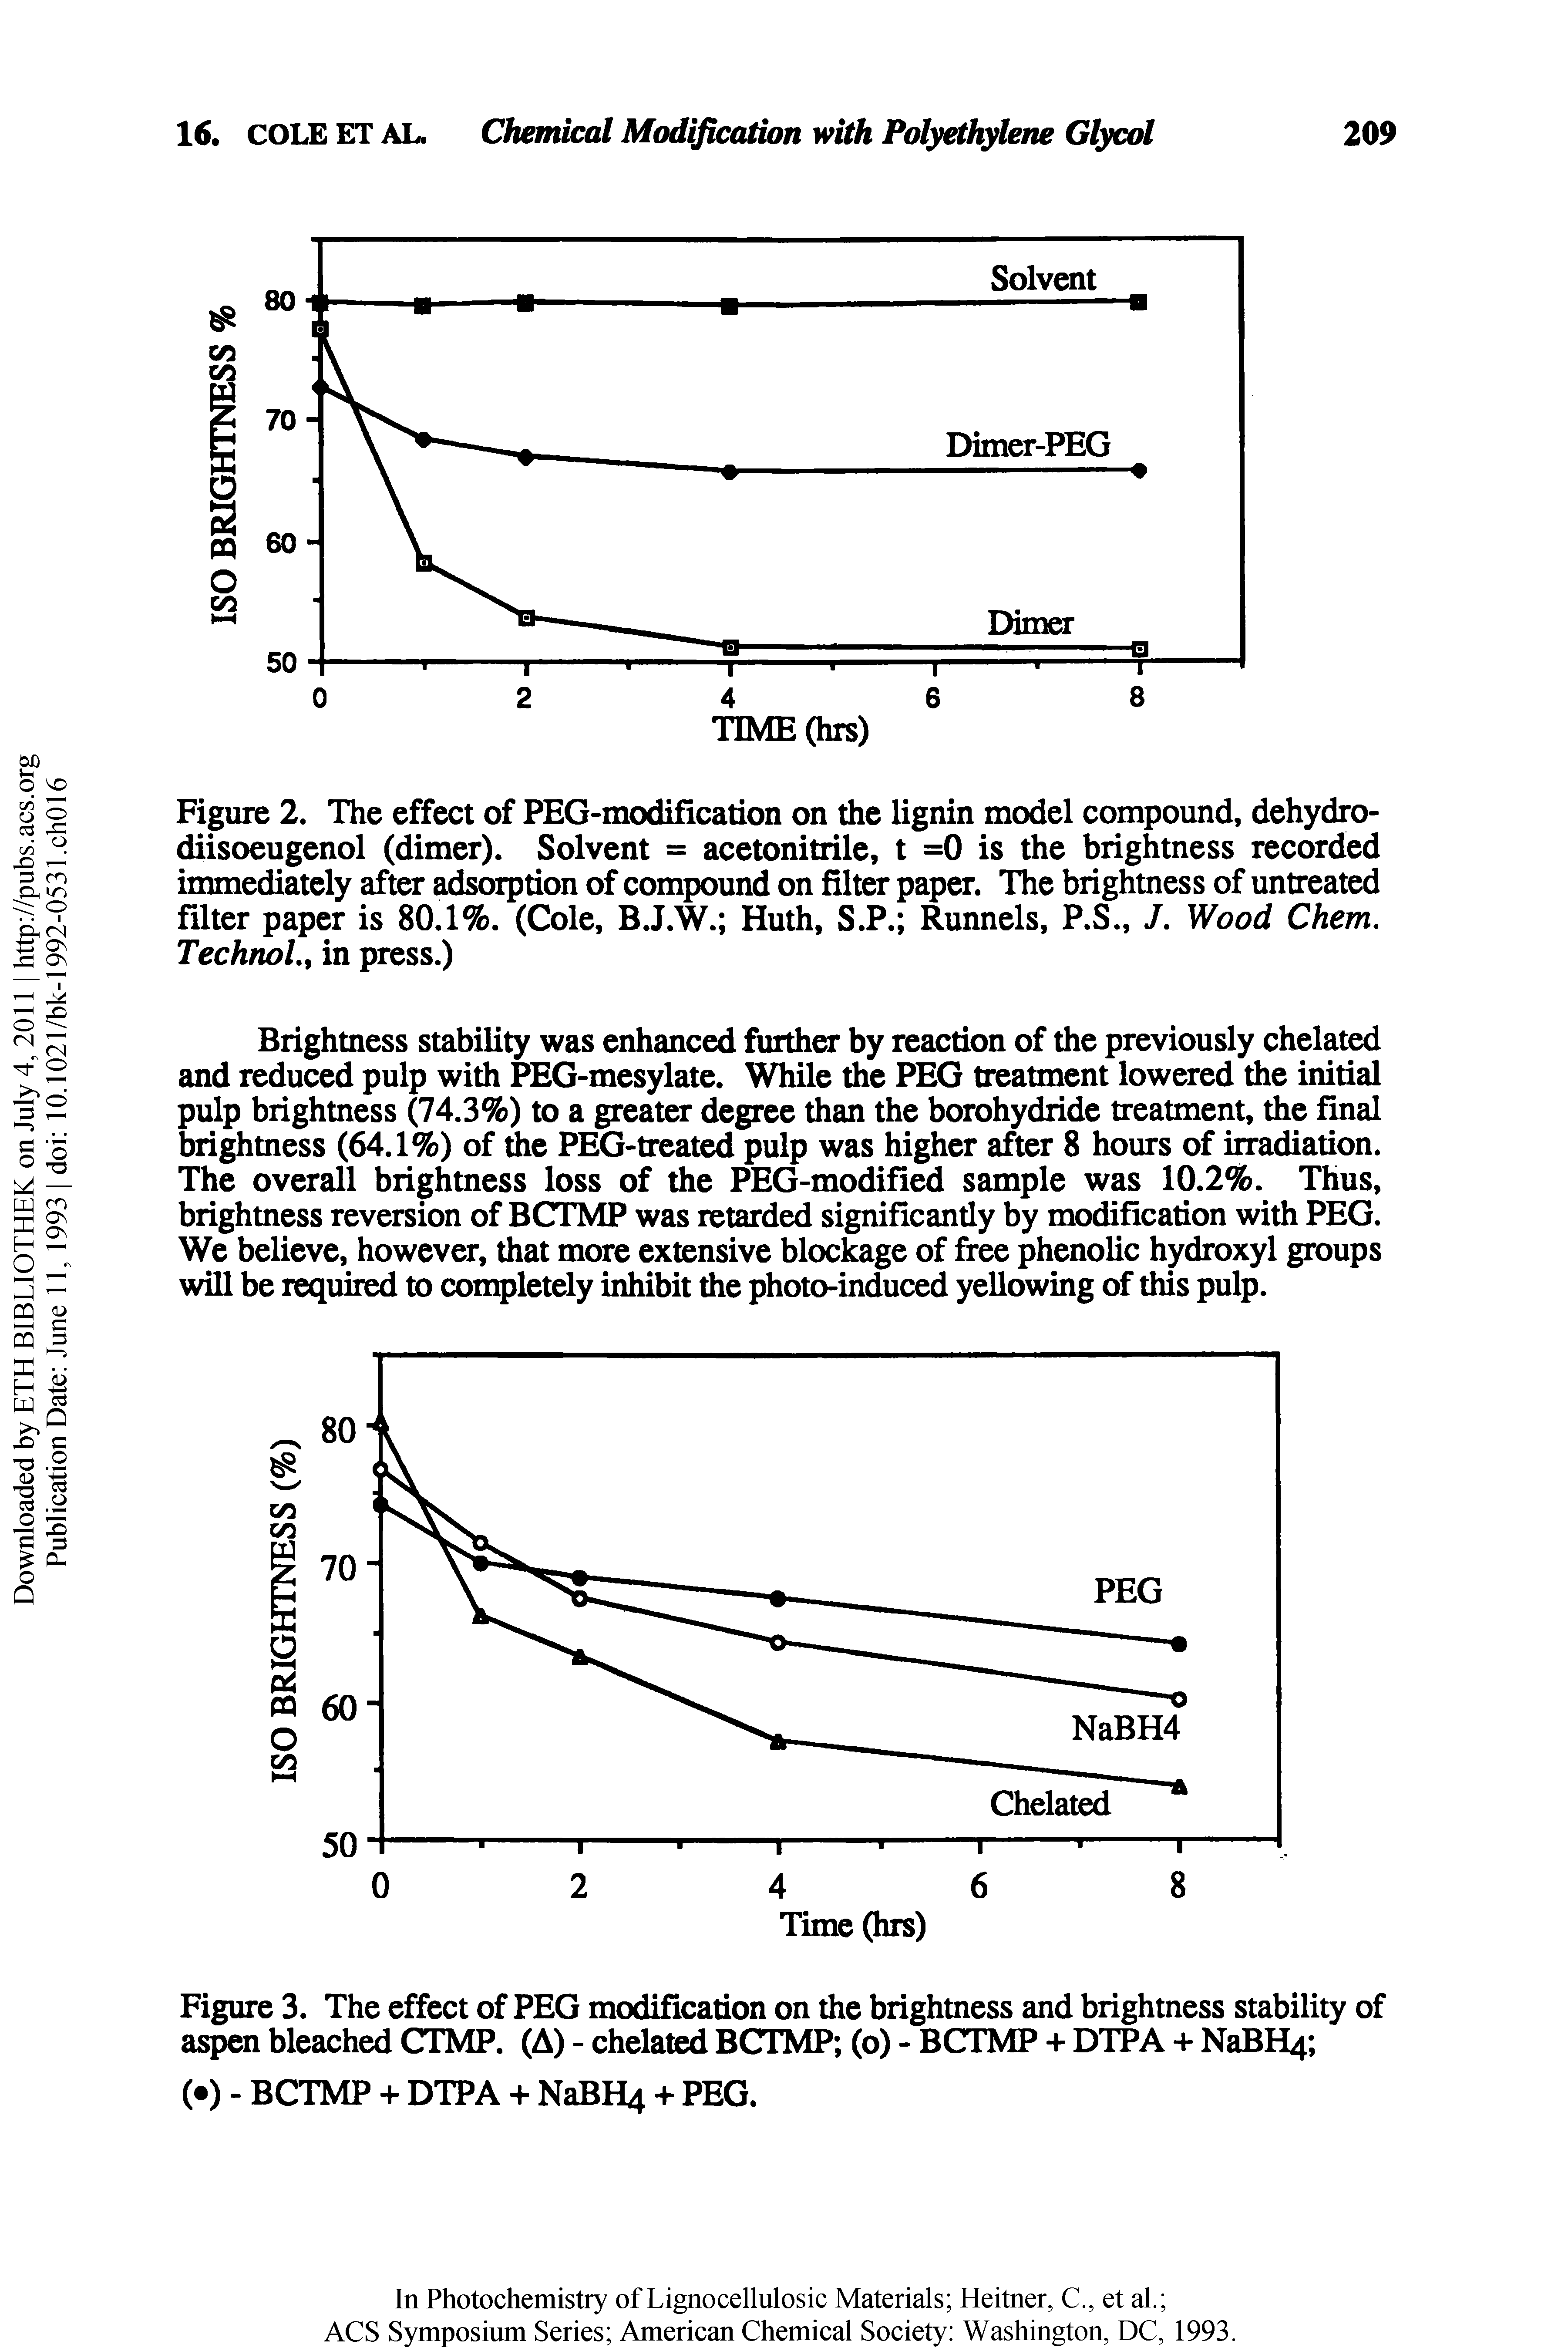 Figure 2. The effect of PEG-modification on the lignin model compound, dehydro-diisoeugenol (dimer). Solvent = acetonitrile, t =0 is the brightness recorded immediately after adsorption of compound on filter paper. The brightness of untreated filter paper is 80.1%. (Cole, B.J.W. Huth, S.P. Runnels, P.S., /. Wood Chem. Technol., in press.)...